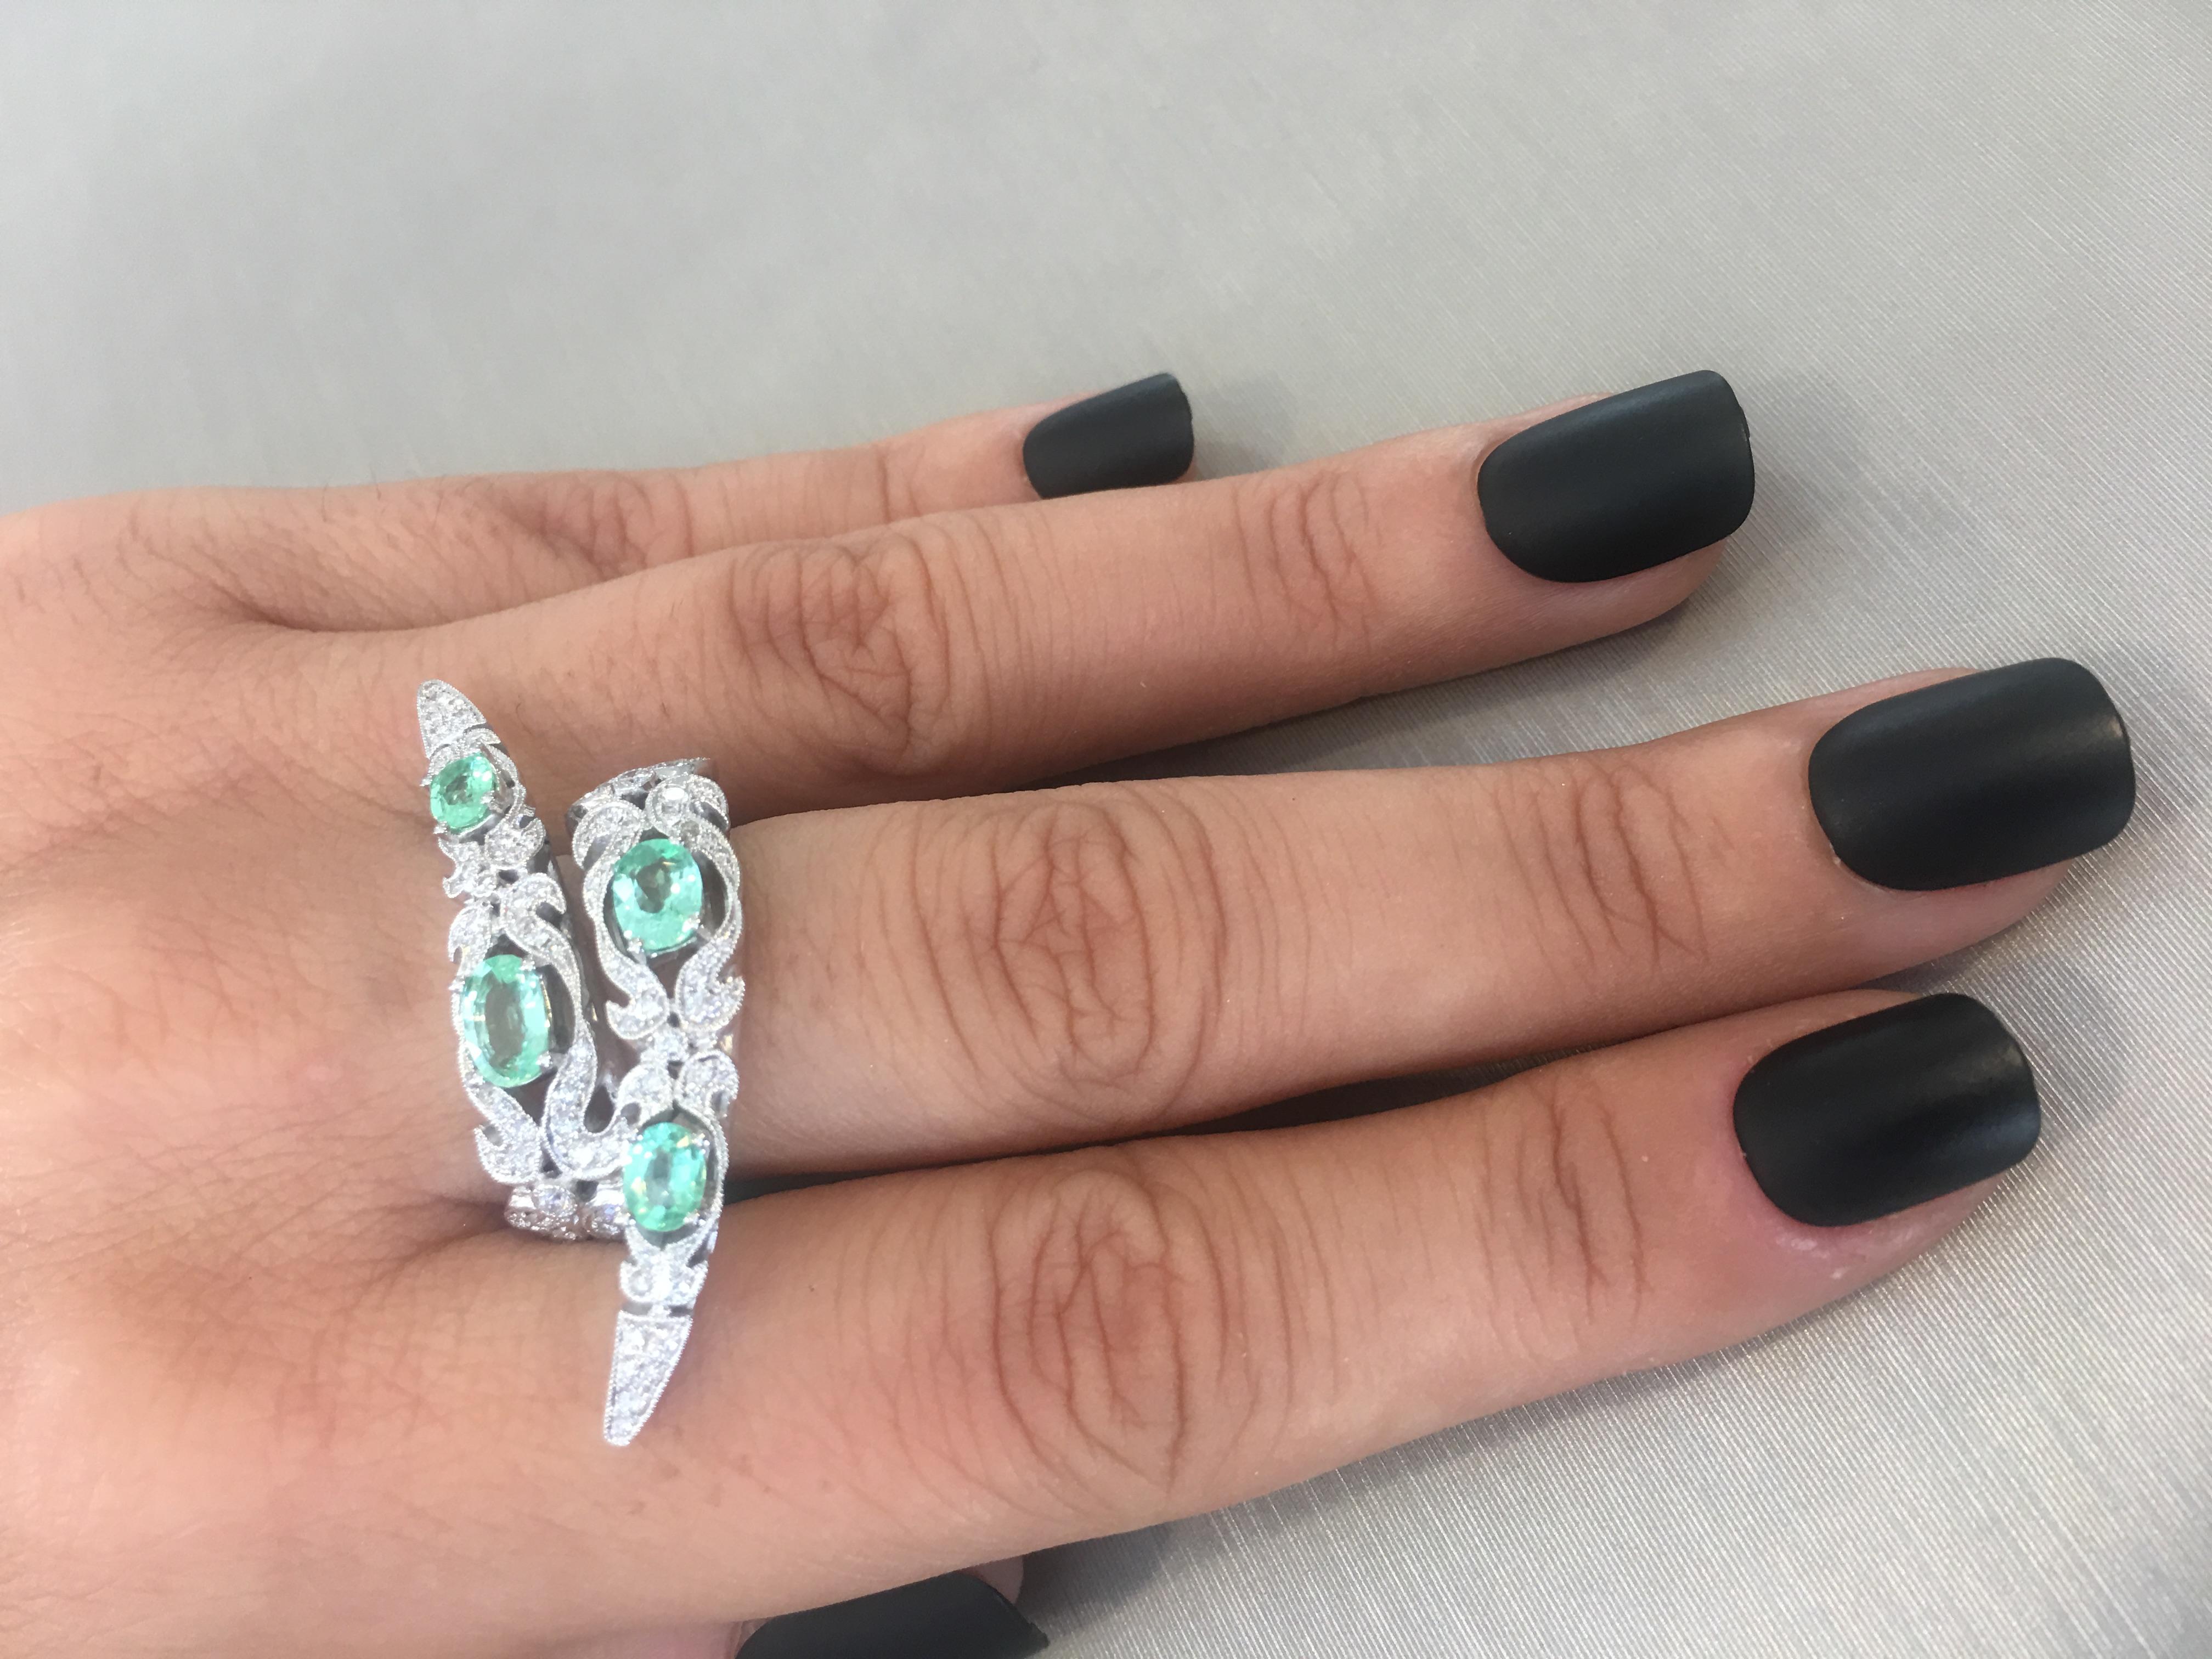 18 Karat white gold 'Maleficent Paraiba Ring' from Parahiba Collection created by Monan with 1.46 carats of paraiba tourmalines and 104 brilliant cut diamonds with the total weight of 1.46 carats.
Fingers size 53 (Europe) = 6.5 (US) = M 1/2 (UK) 